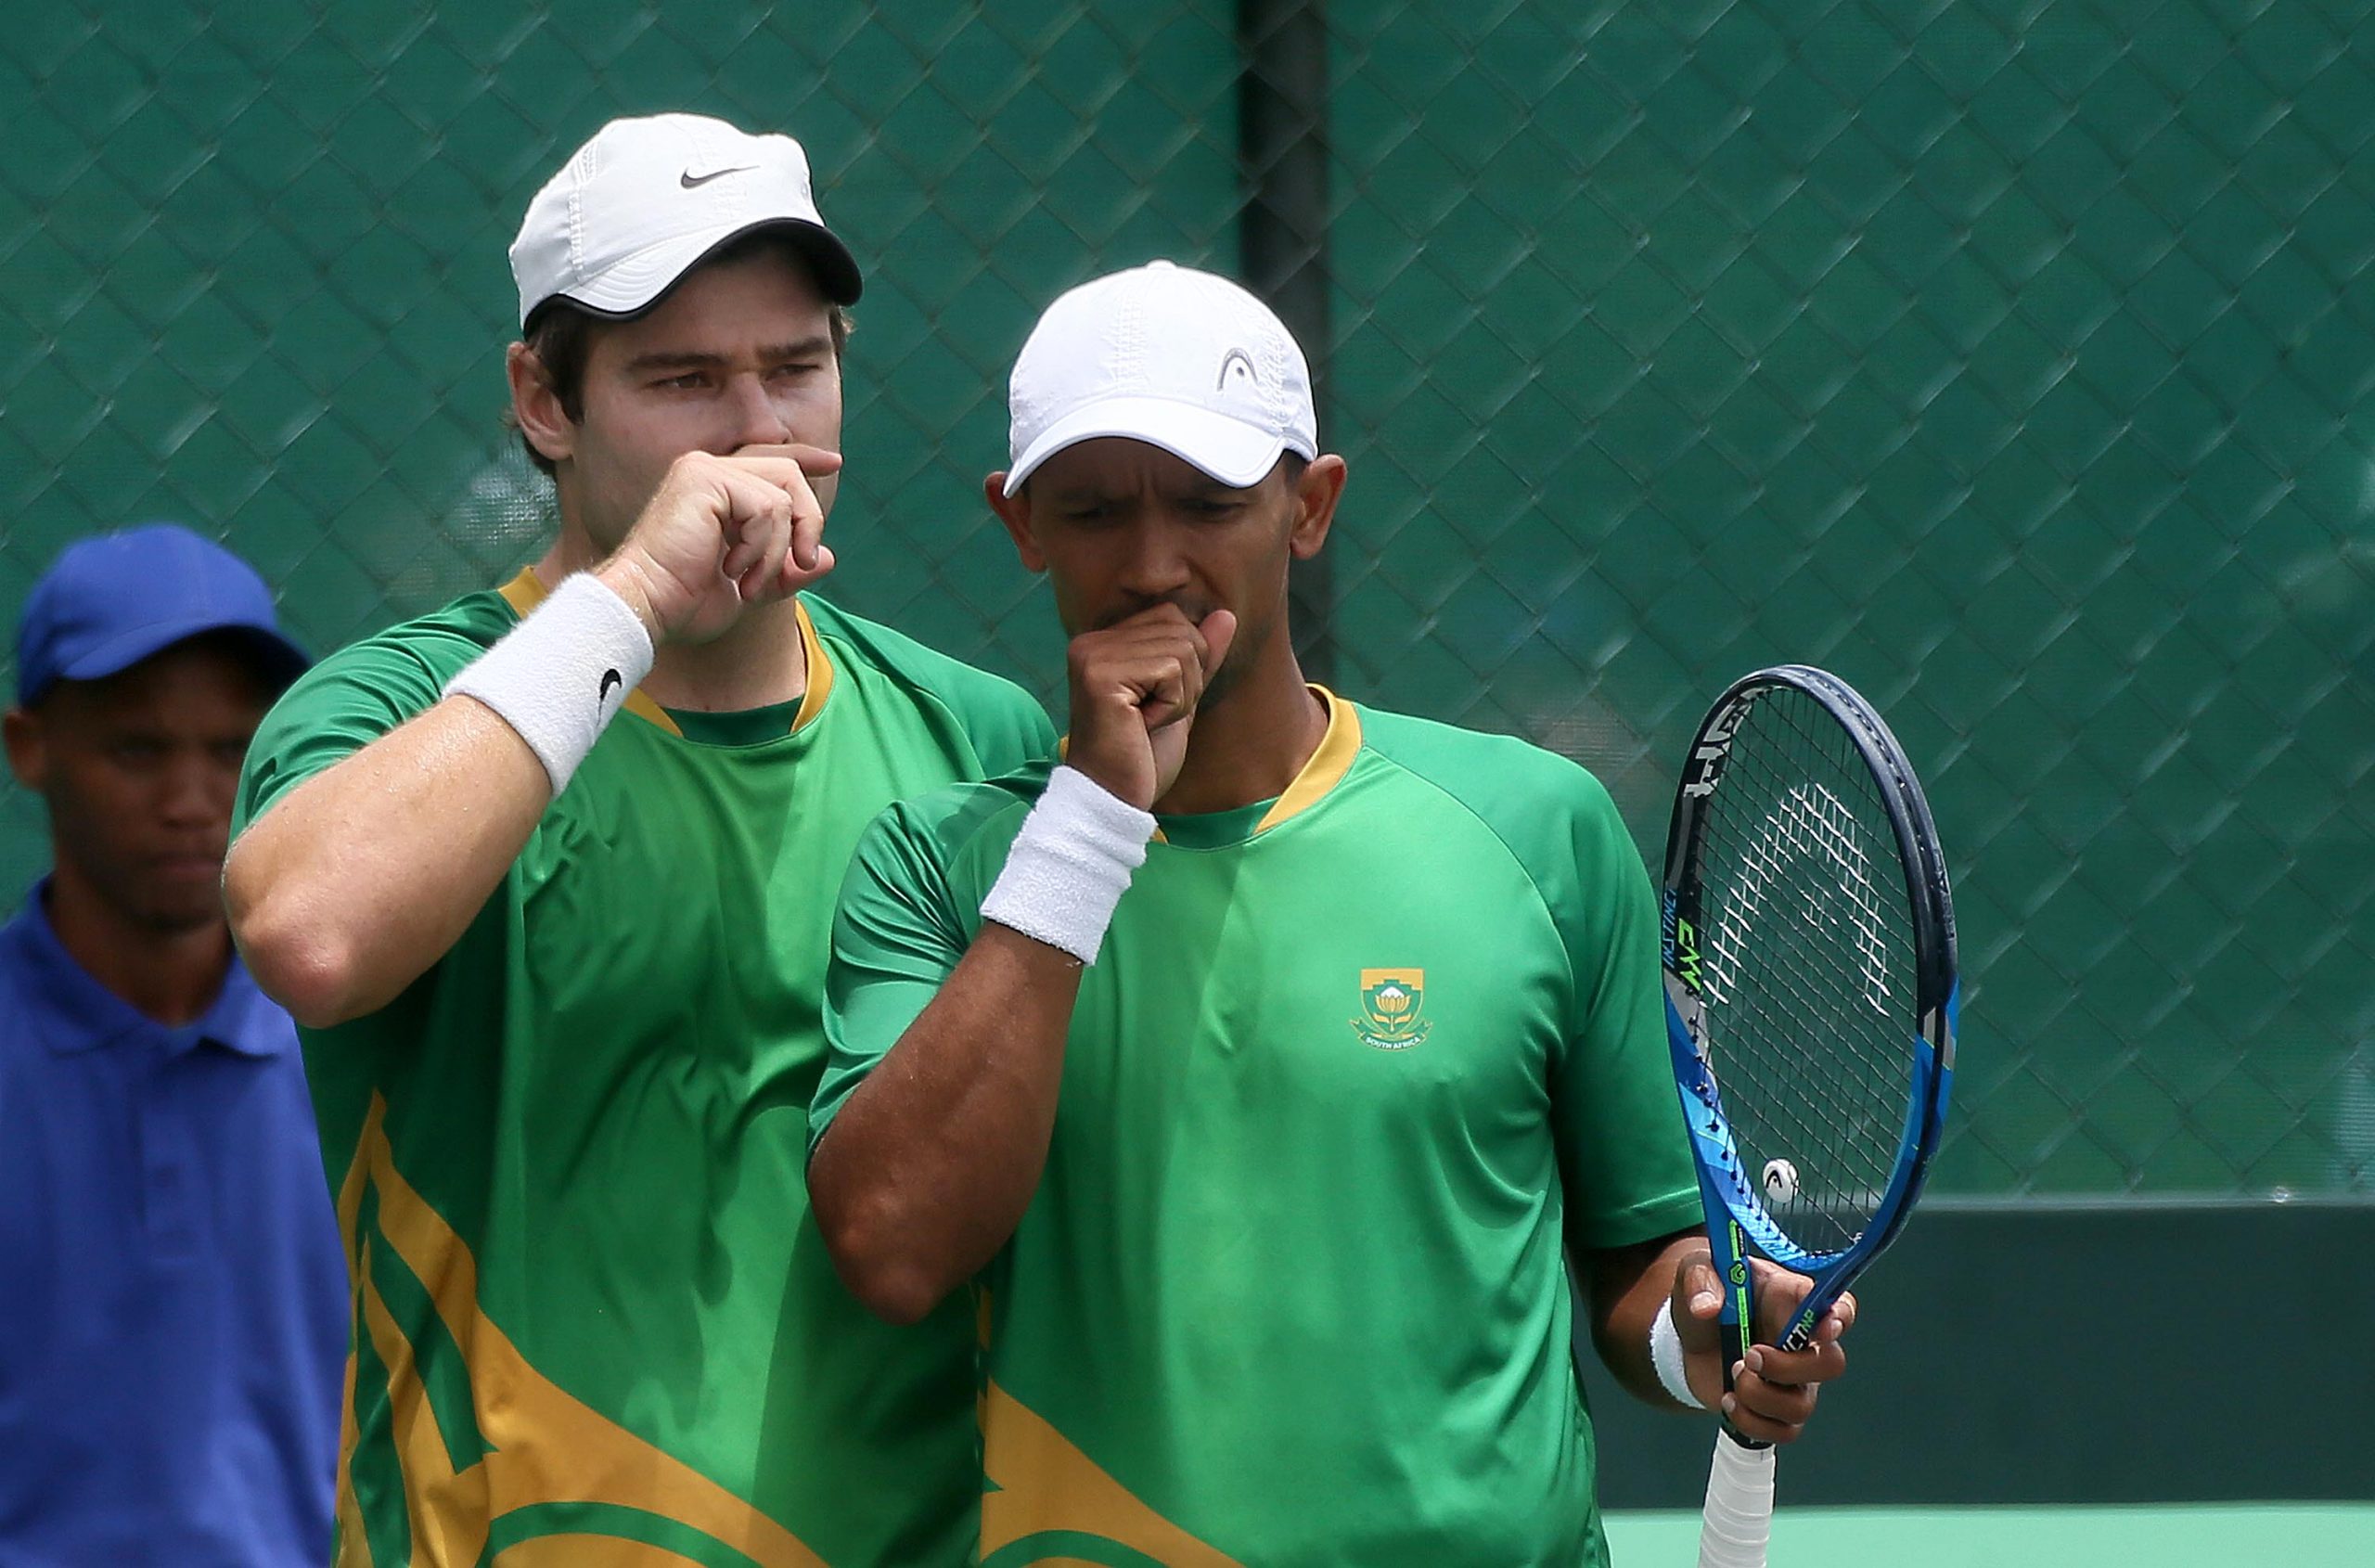 Ruan Roelofse to open South African Davis Cup campaign - Sports Leo